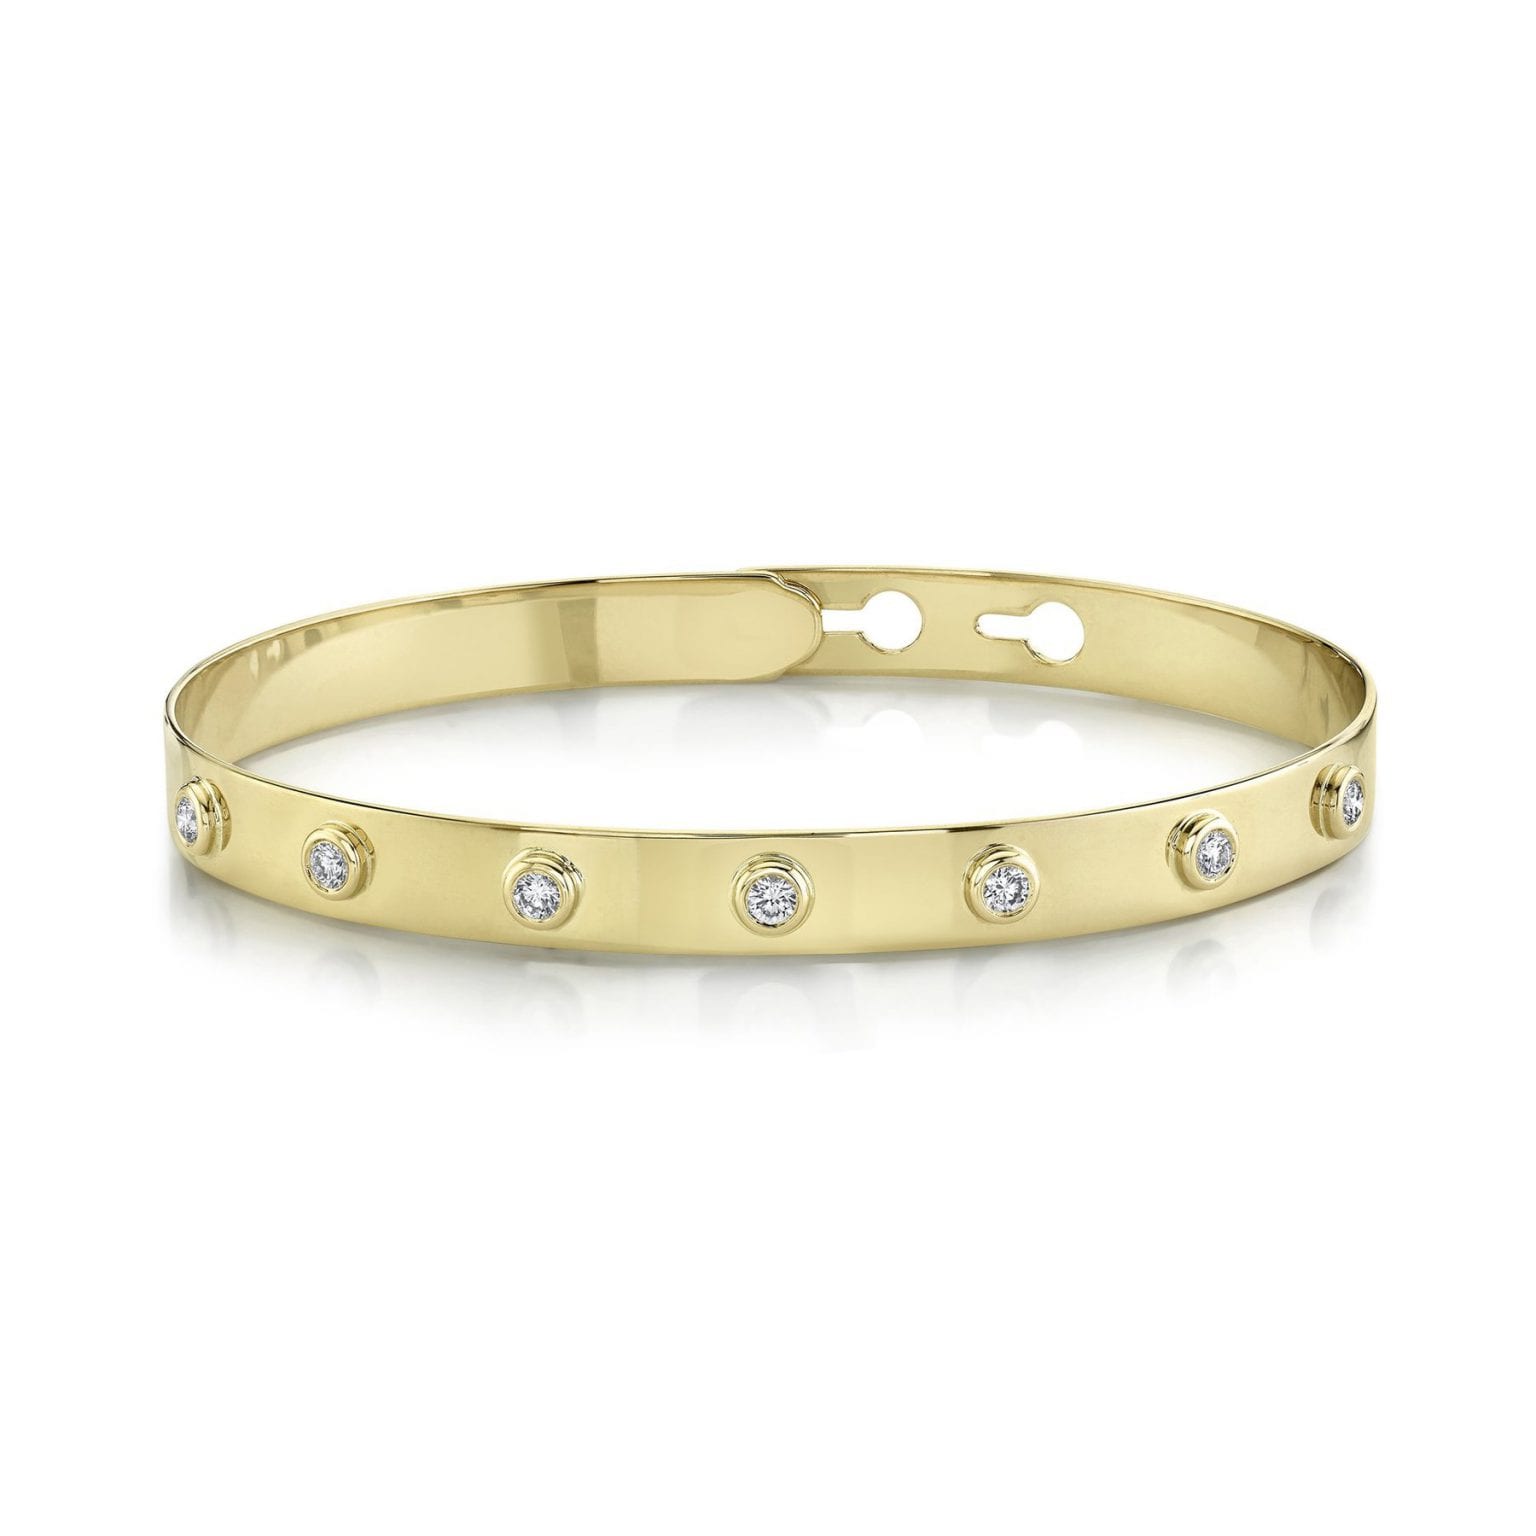 Club Collection – Bailey's Fine Jewelry